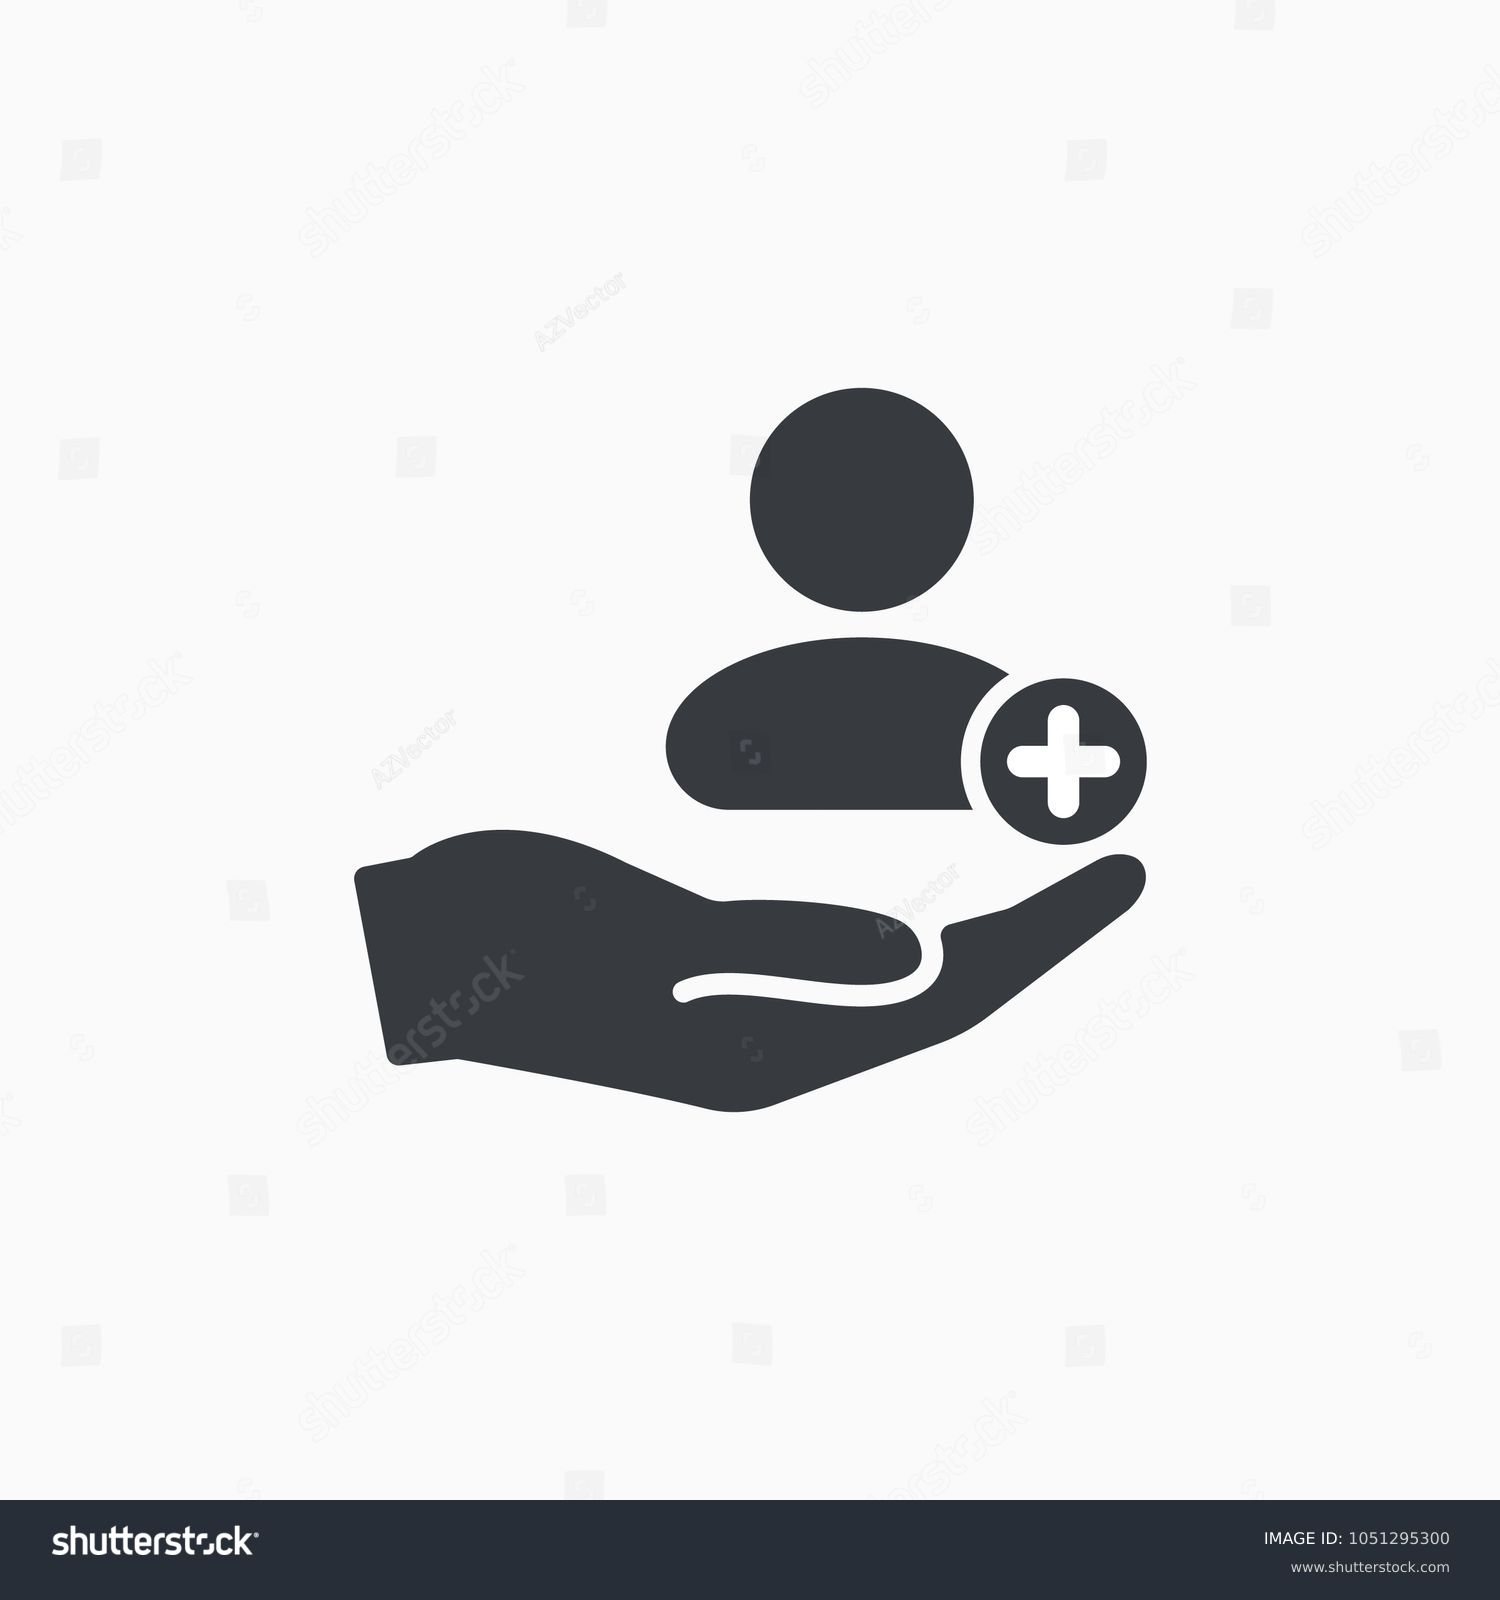 Patient icon. Customer icon with add, additional sign. Patient icon and new, plus, positive symbol. Patient, icon, new, customer, support, safety, retention, extra, join, more, plus #1051295300